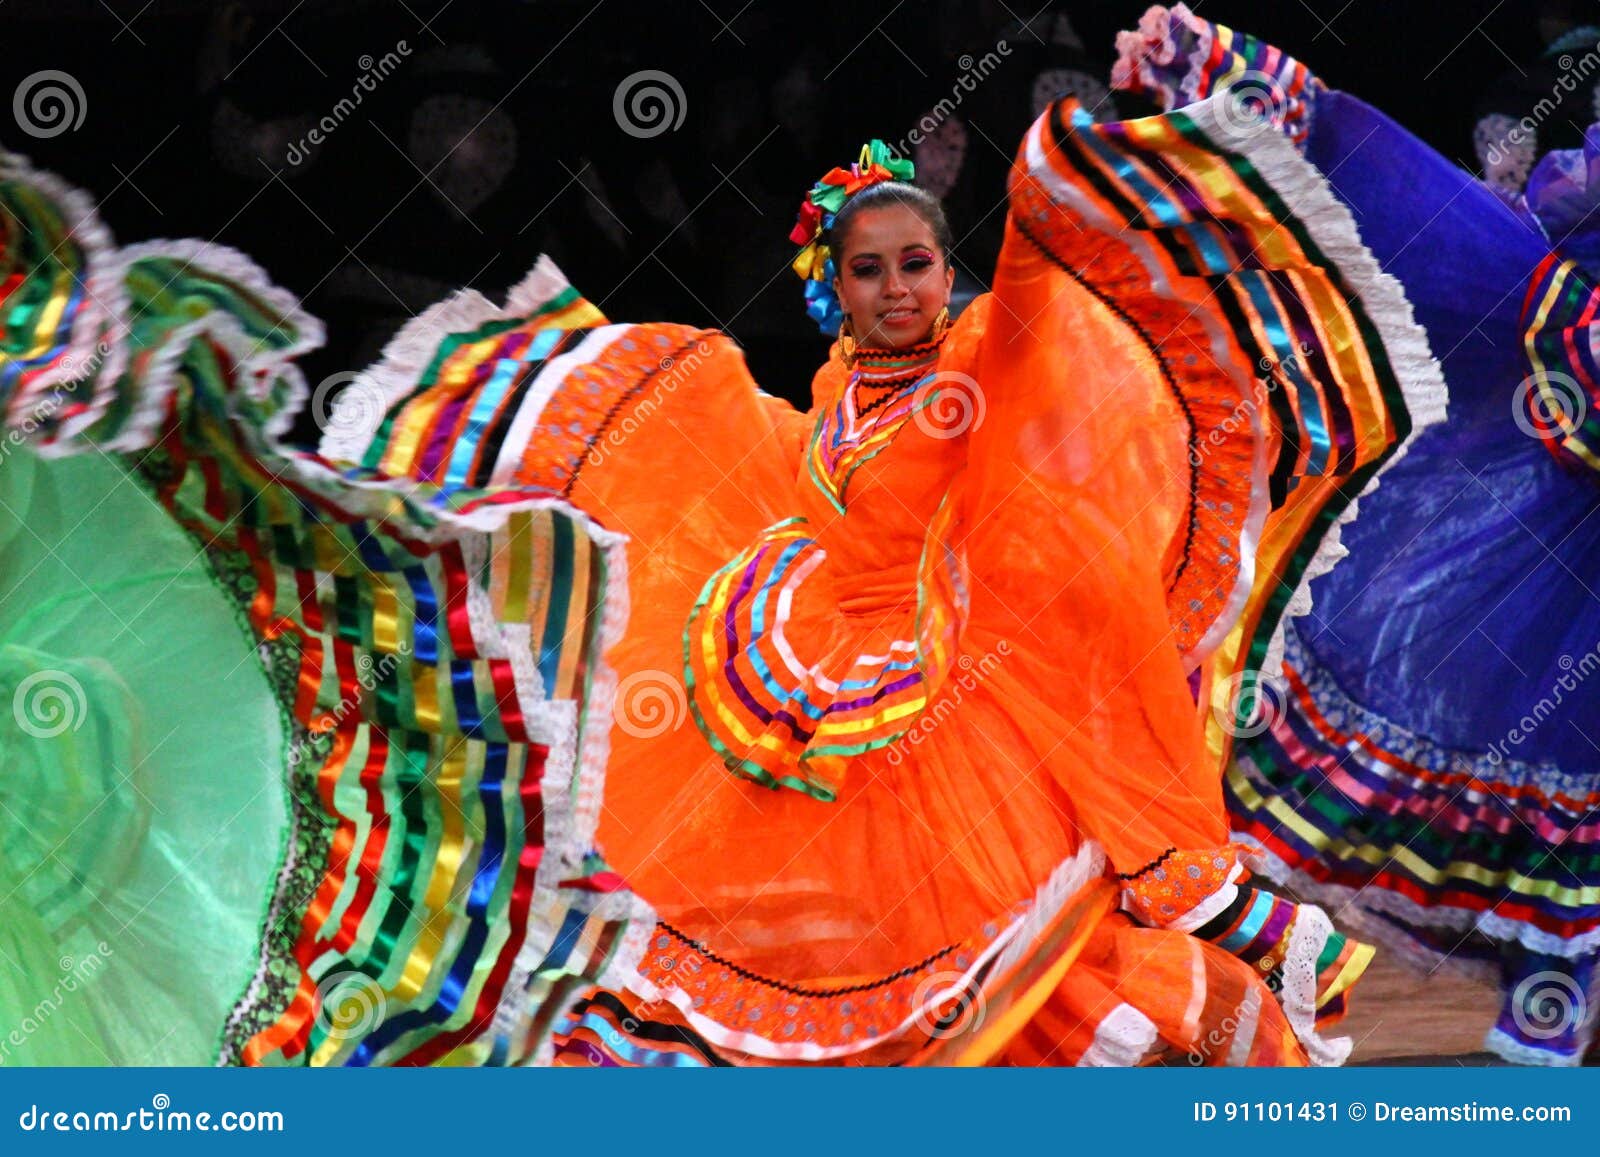 National Costume of Mexico, Women Editorial Photo - Image of skirts ...